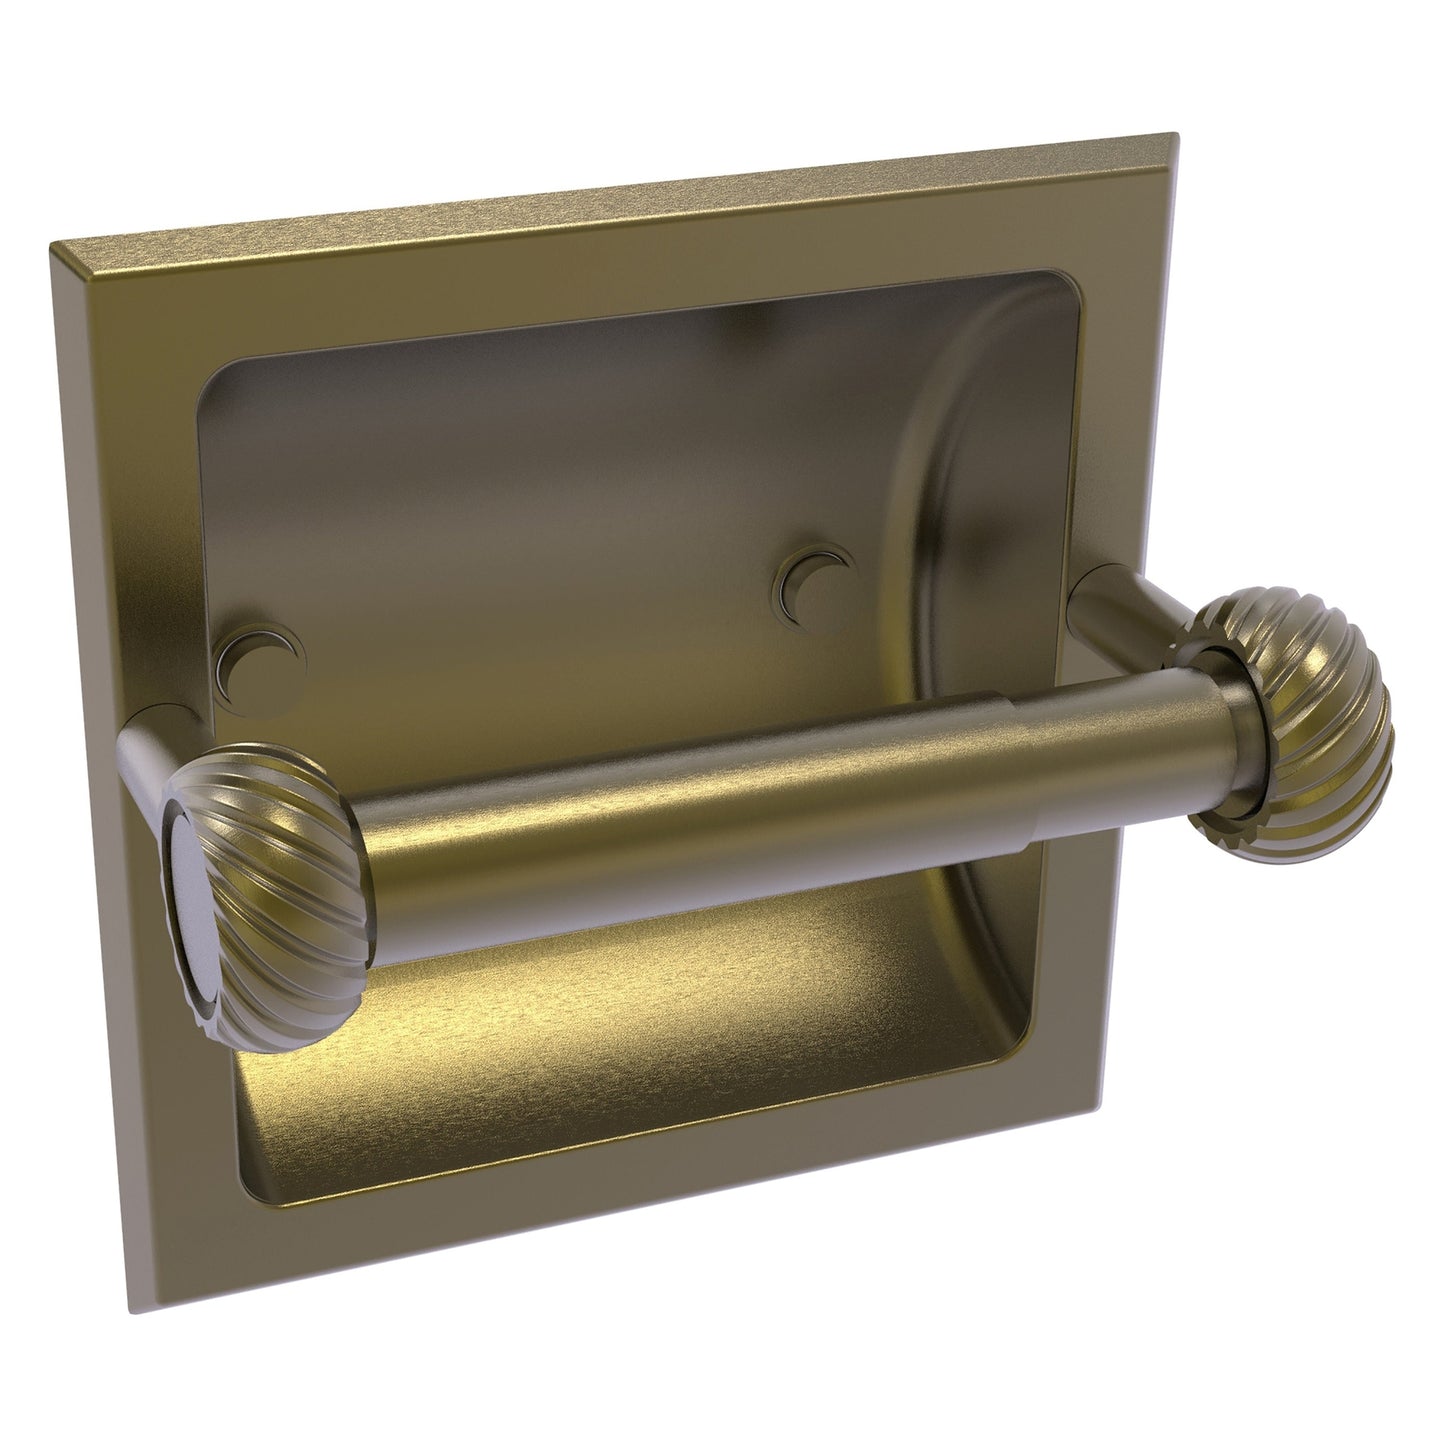 Allied Brass Skyline 2024-CT 6.3" x 6.1" Antique Brass Solid Brass Recessed Toilet Tissue Holder With Twisted Accents